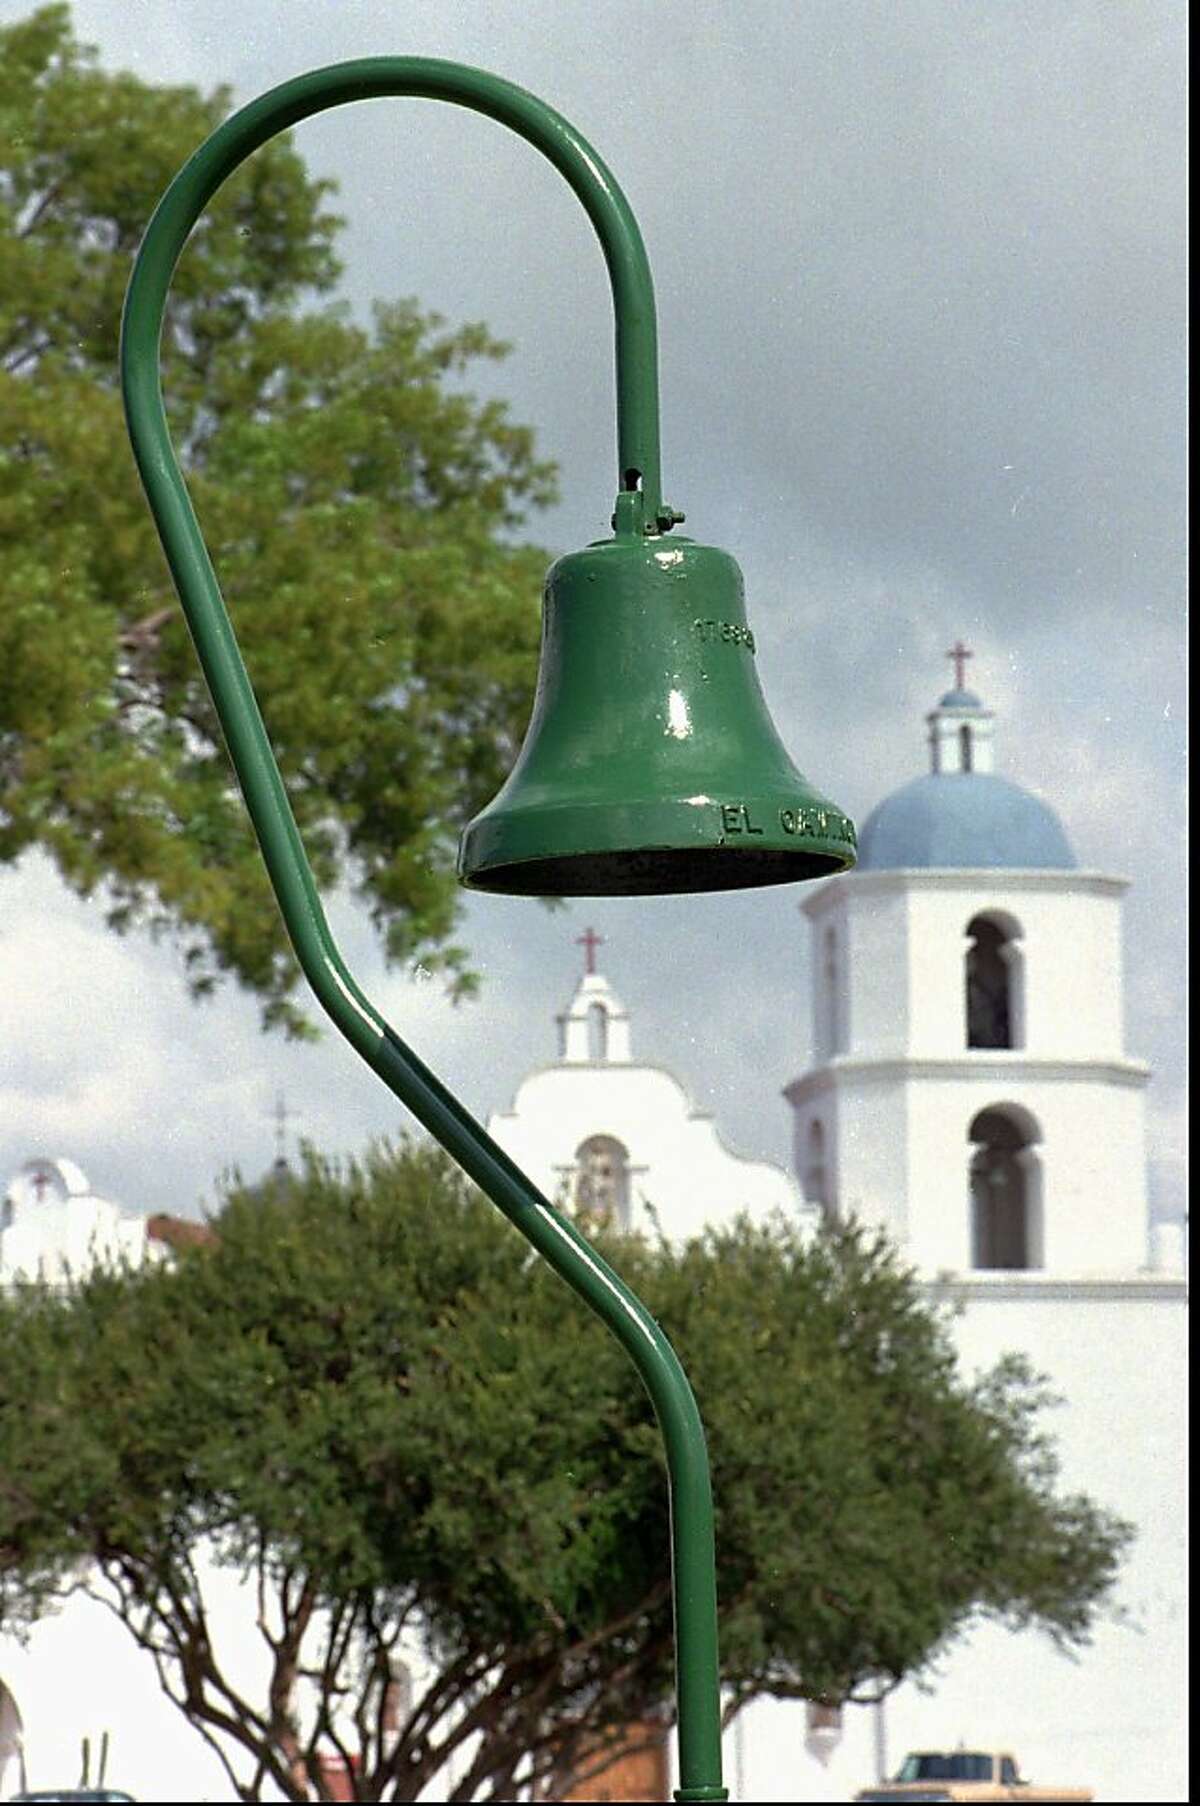 A mission bell leads the way to the Mission San Luis Rey in Oceanside, Calif. Wednesday, March 4, 1998. A campaign has started to reinstall the bells along the historic El Camino Real, the route connecting California's chain of missions. At one time 450 metal bells, weighing 92 pounds and set in the curve of an 11-foot pole shaped like a shepards crook, lined the El Camino route. (AP Photo/Union Tribune, Howard Lipin) ALSO RAN: 3/25/98.